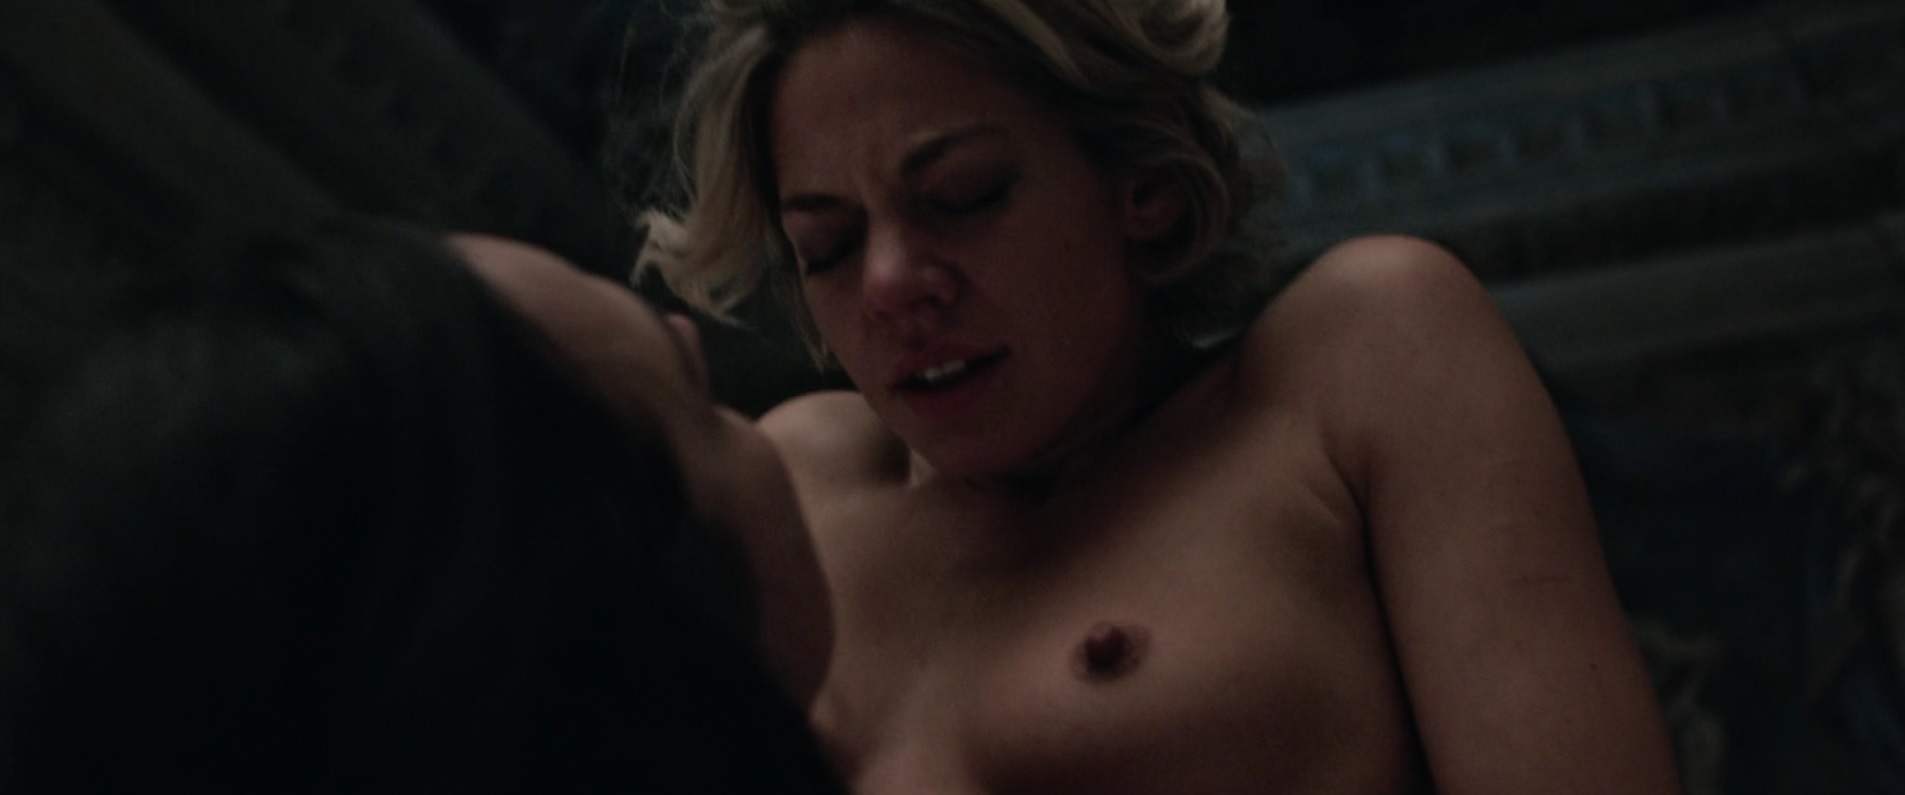 Naked Analeigh Tipton In Compulsion